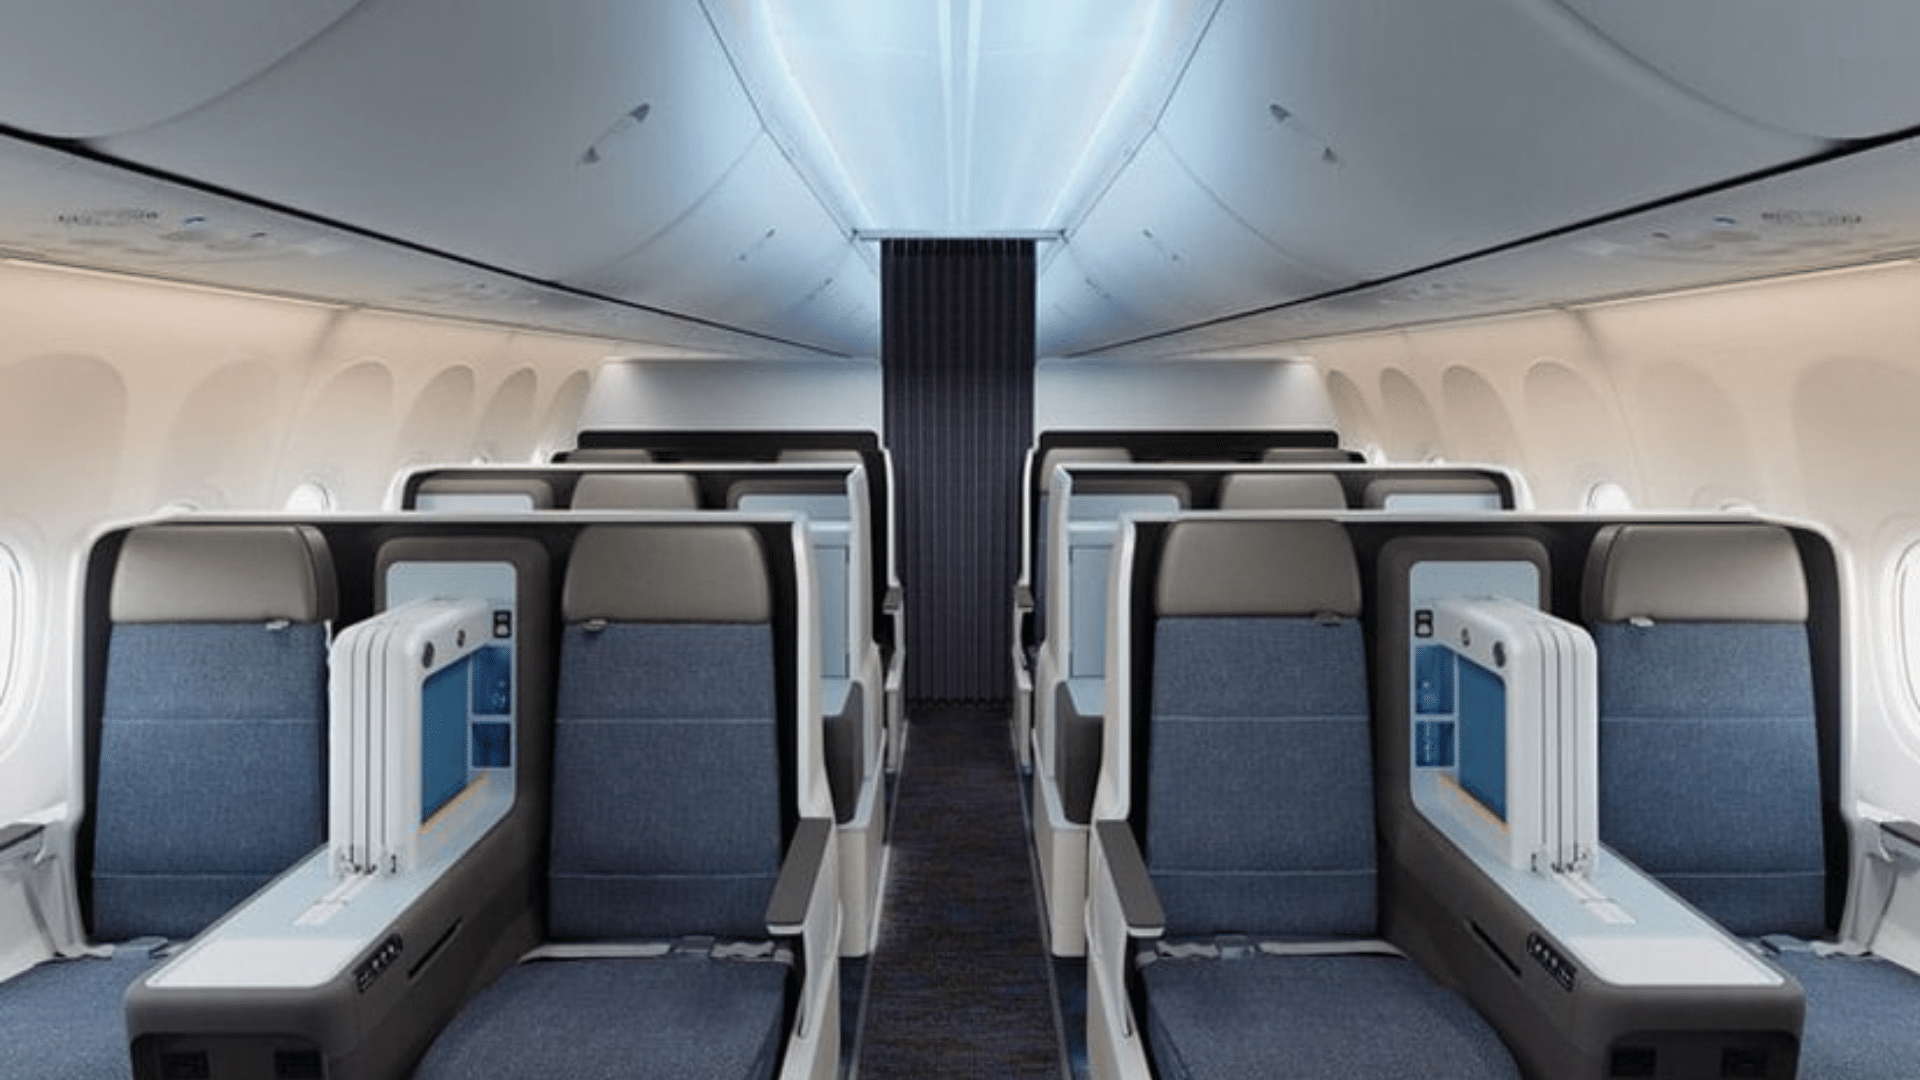 Singapore Airlines Boeing 737 Lie flat Seats